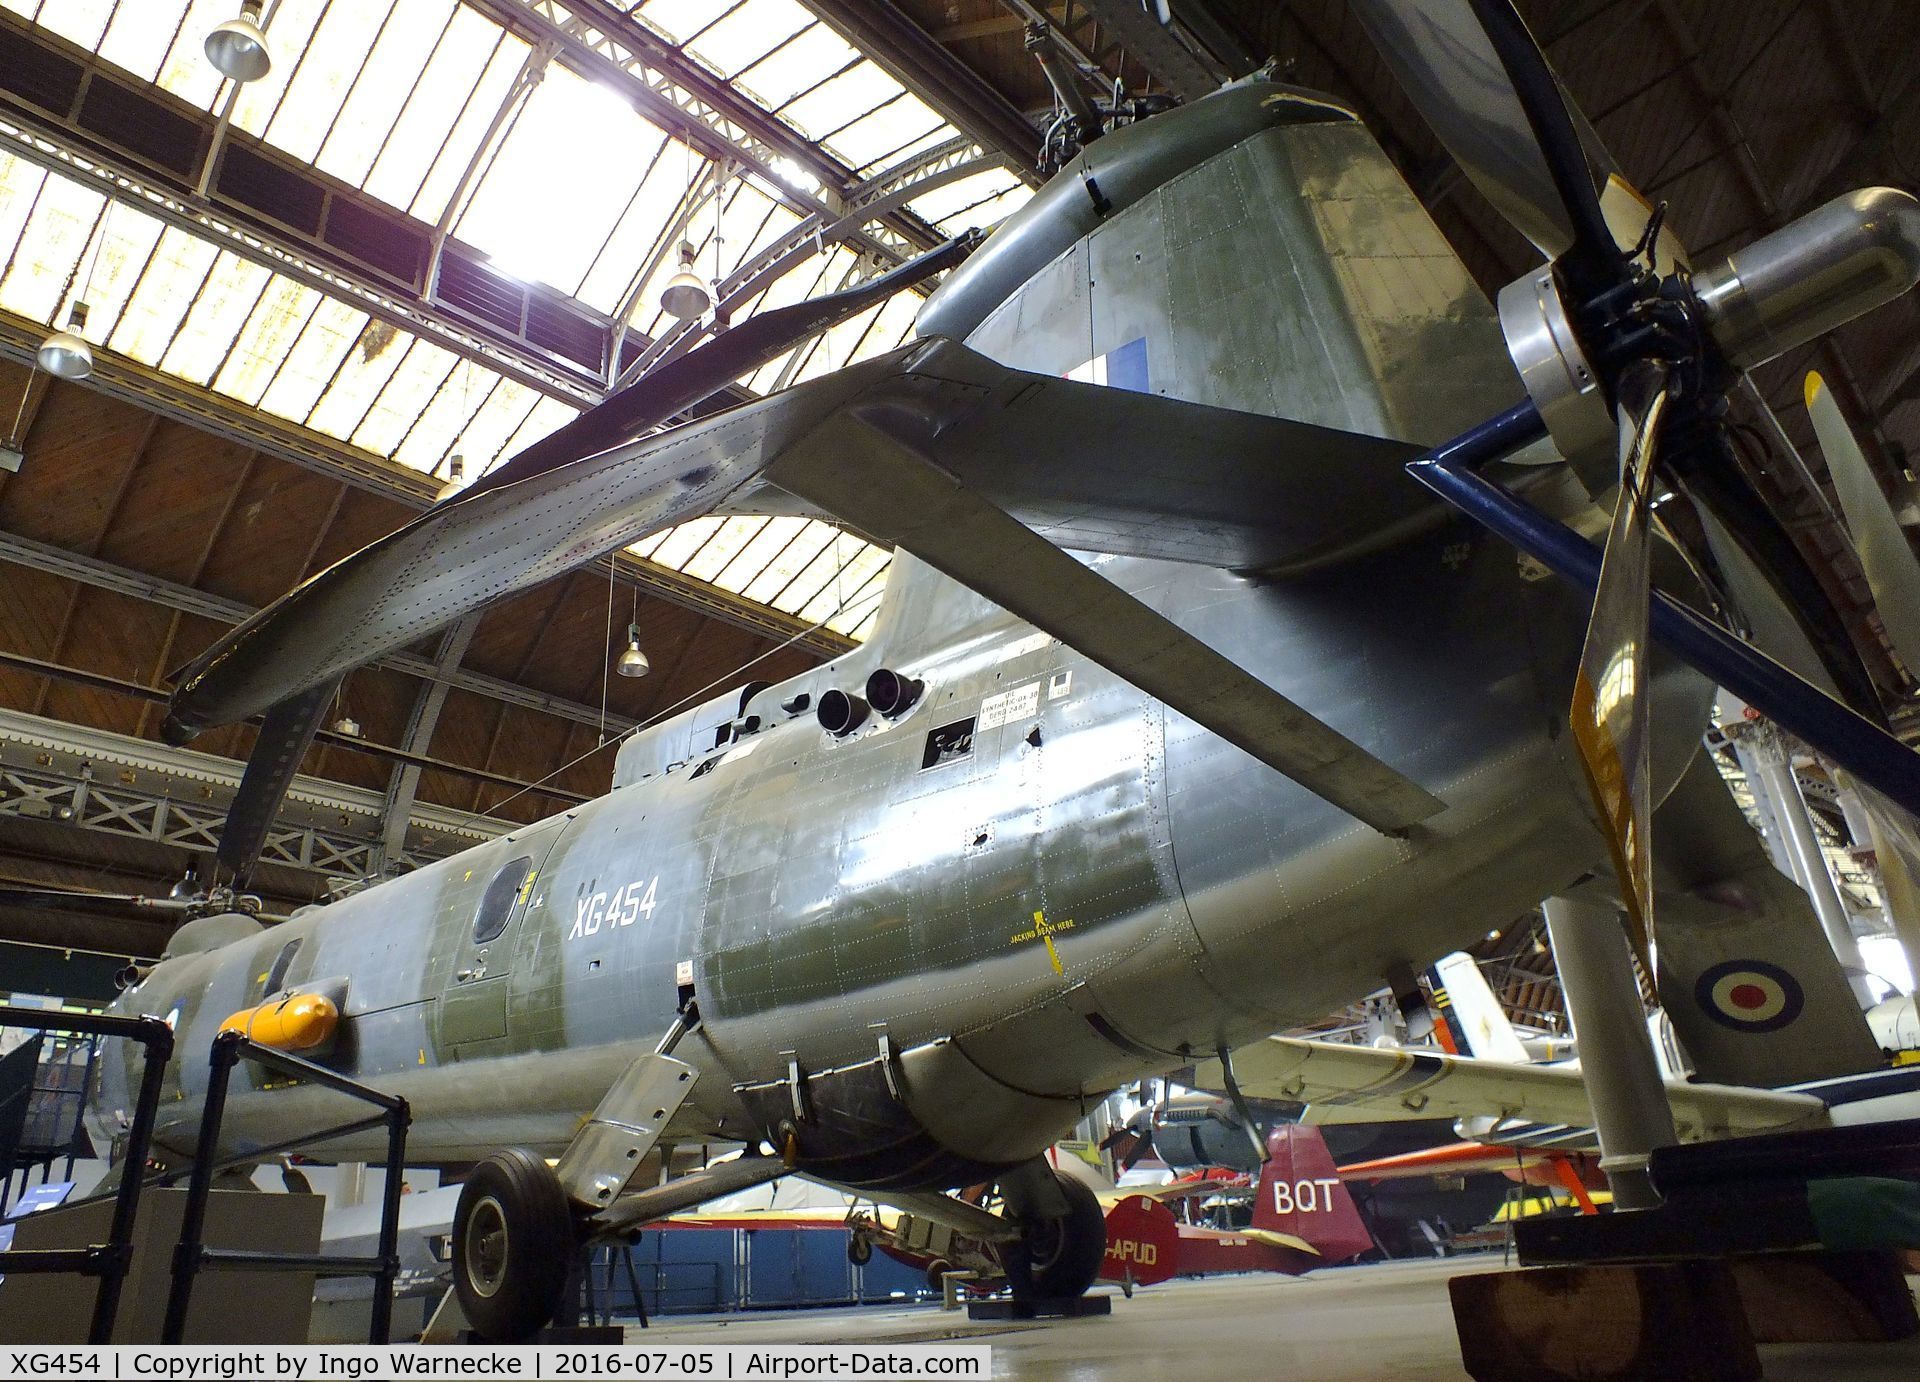 XG454, 1960 Bristol Belvedere HC.1 C/N 13349, Bristol 192 Belvedere HC1 at the Museum of Science and Industry, Manchester